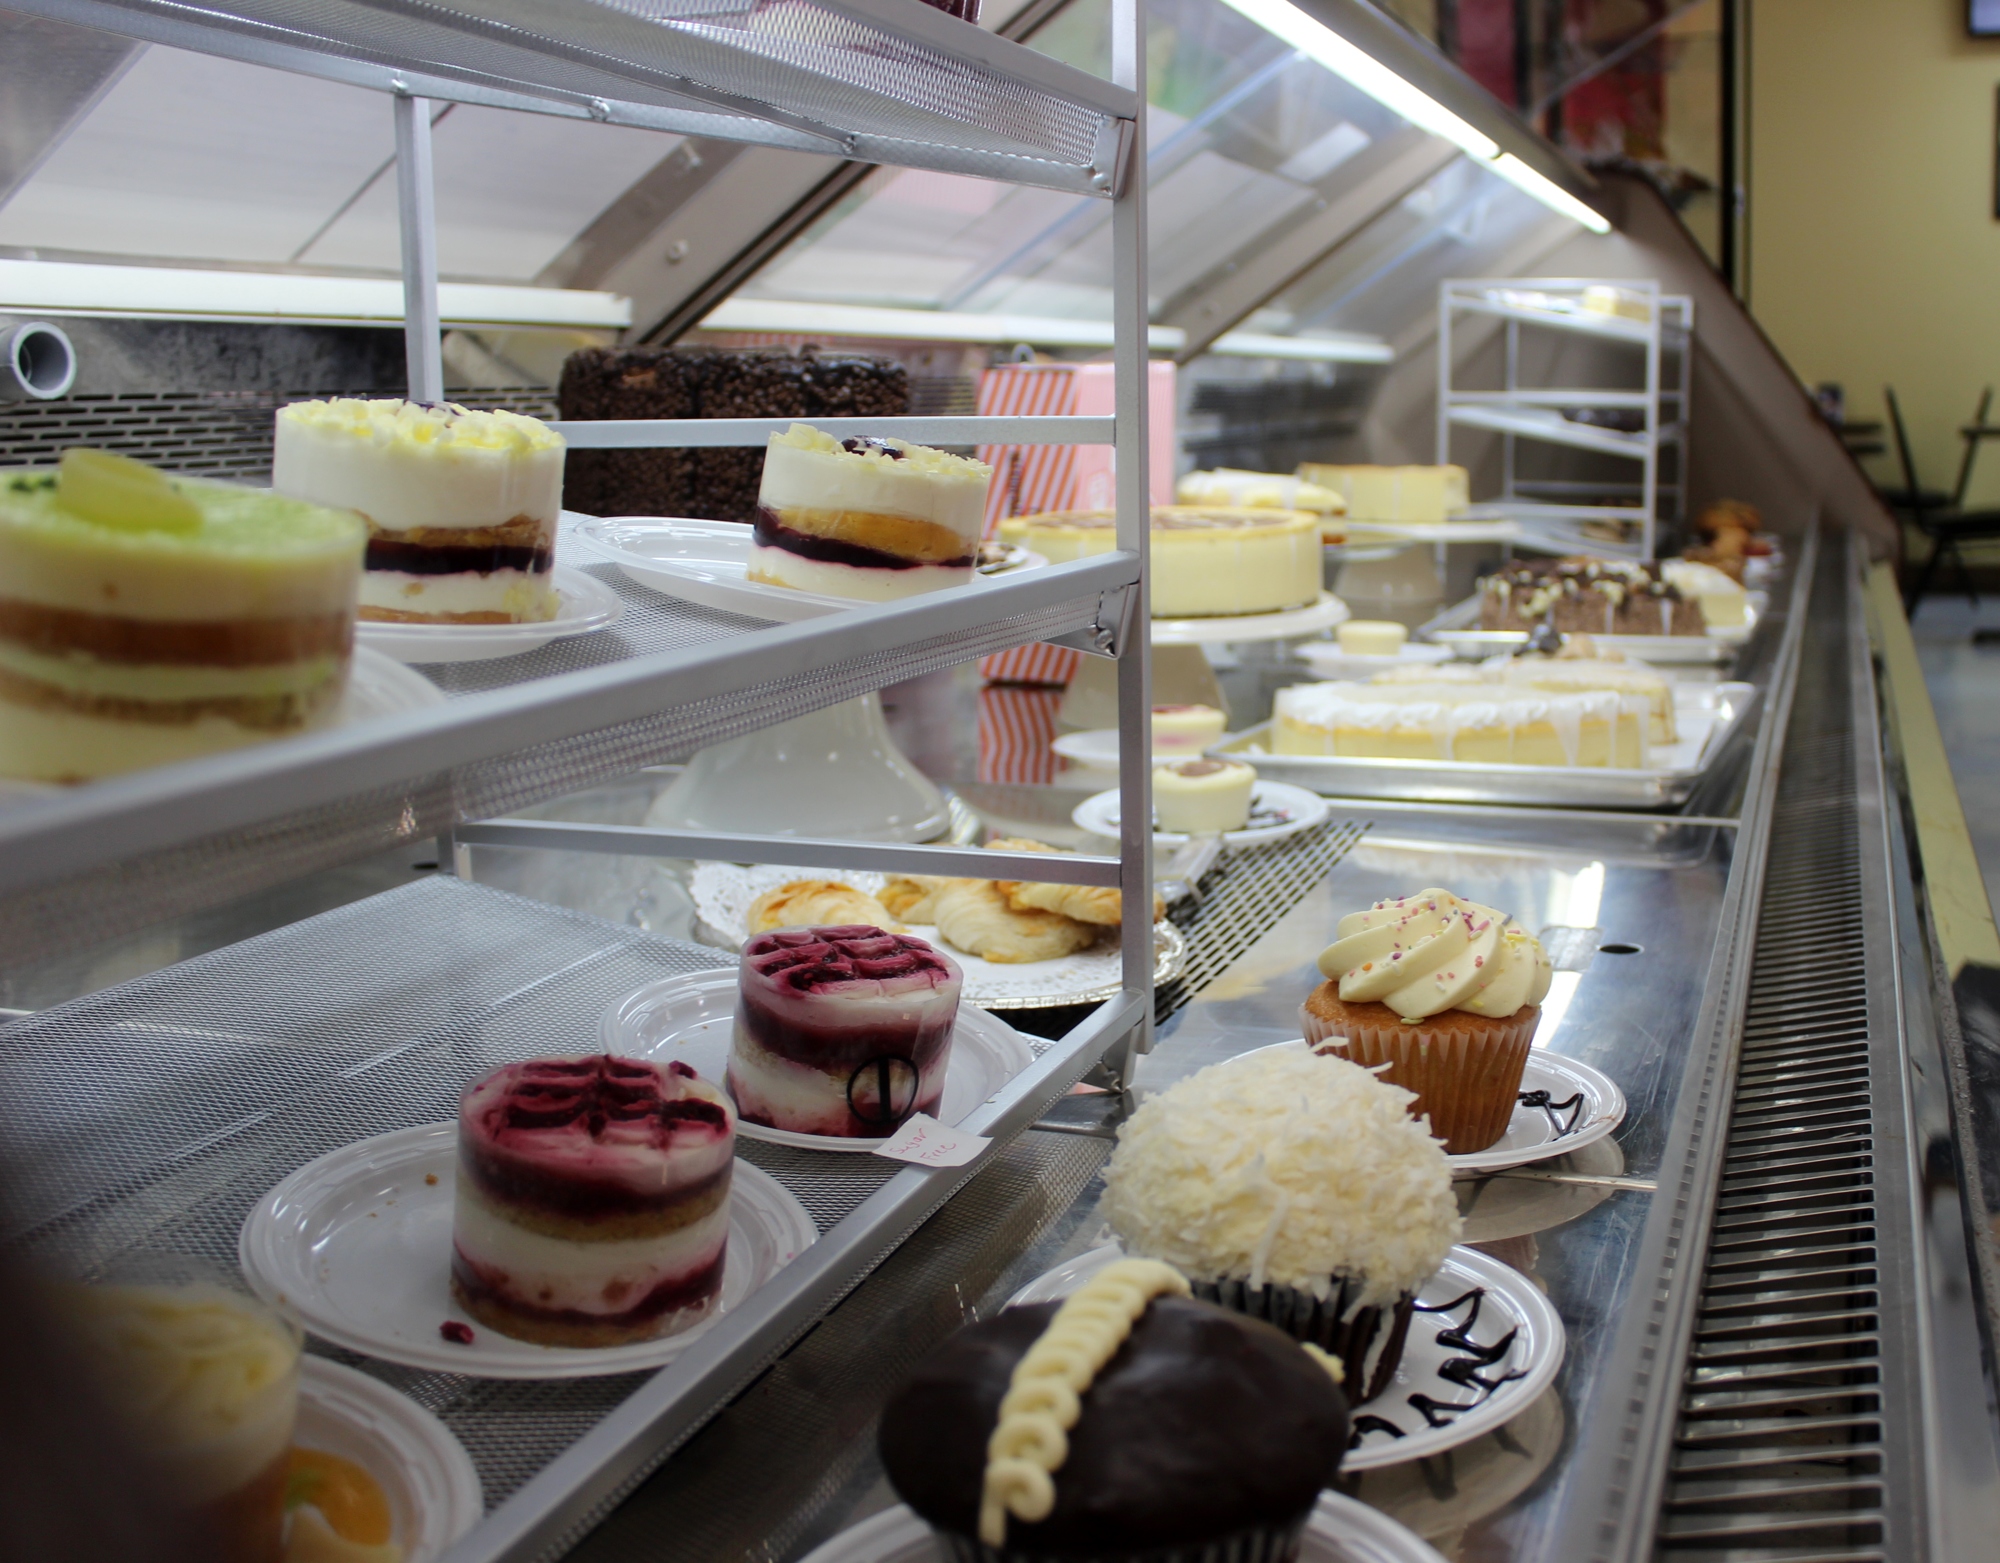 Sarafina Cafe's pastry layout will continuously change, based on customer favorites.